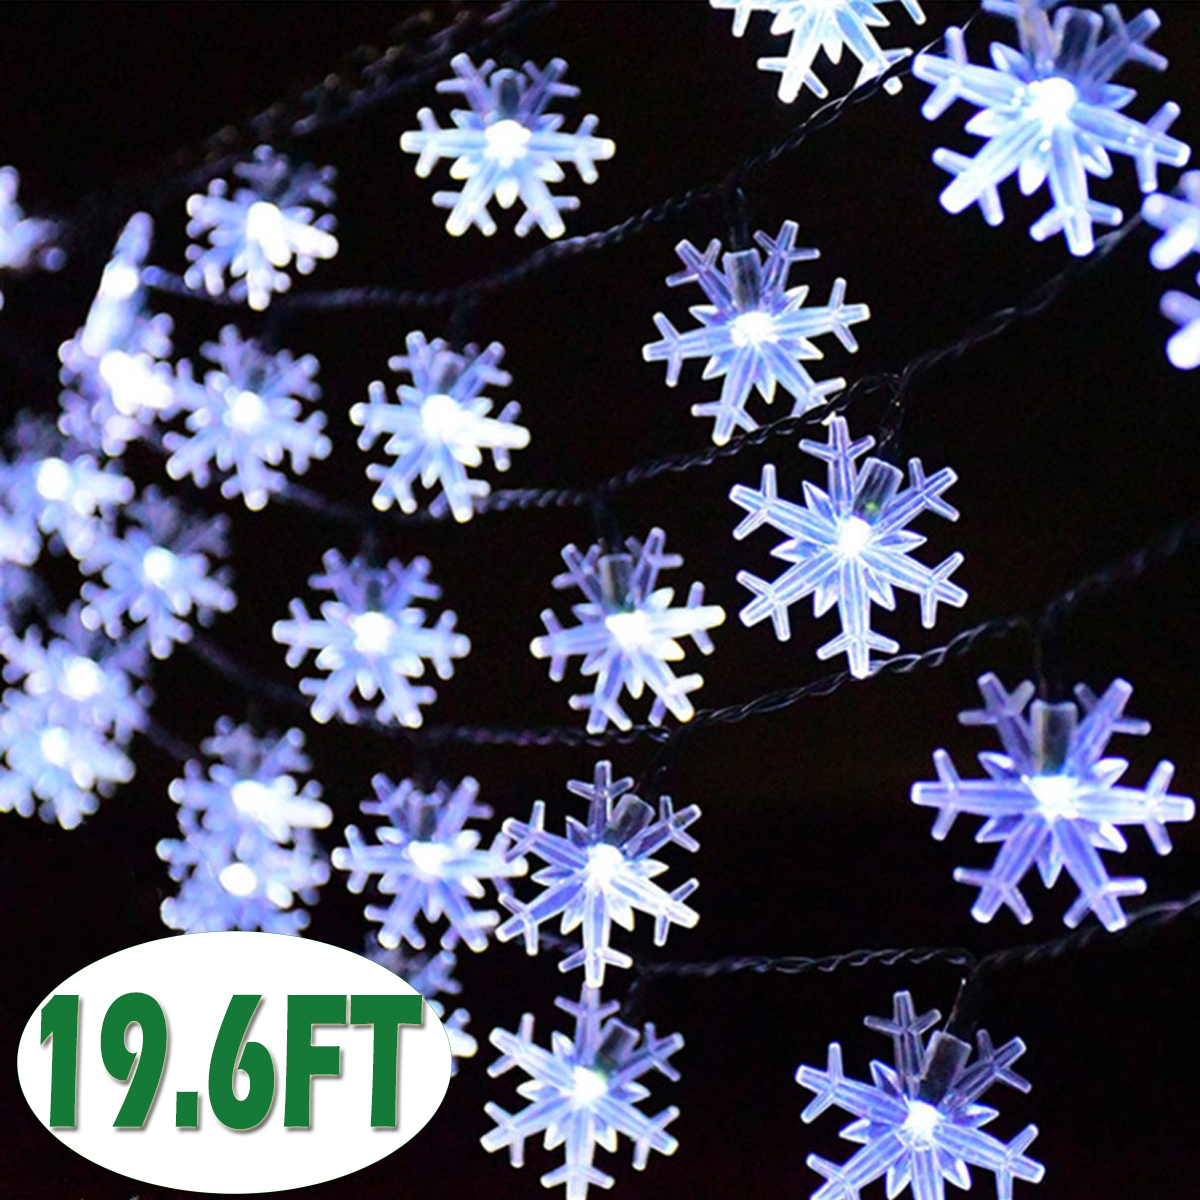 9.8ft x 9.8ft LED Curtain Lights, Starry Christmas String Light, Icicle ...